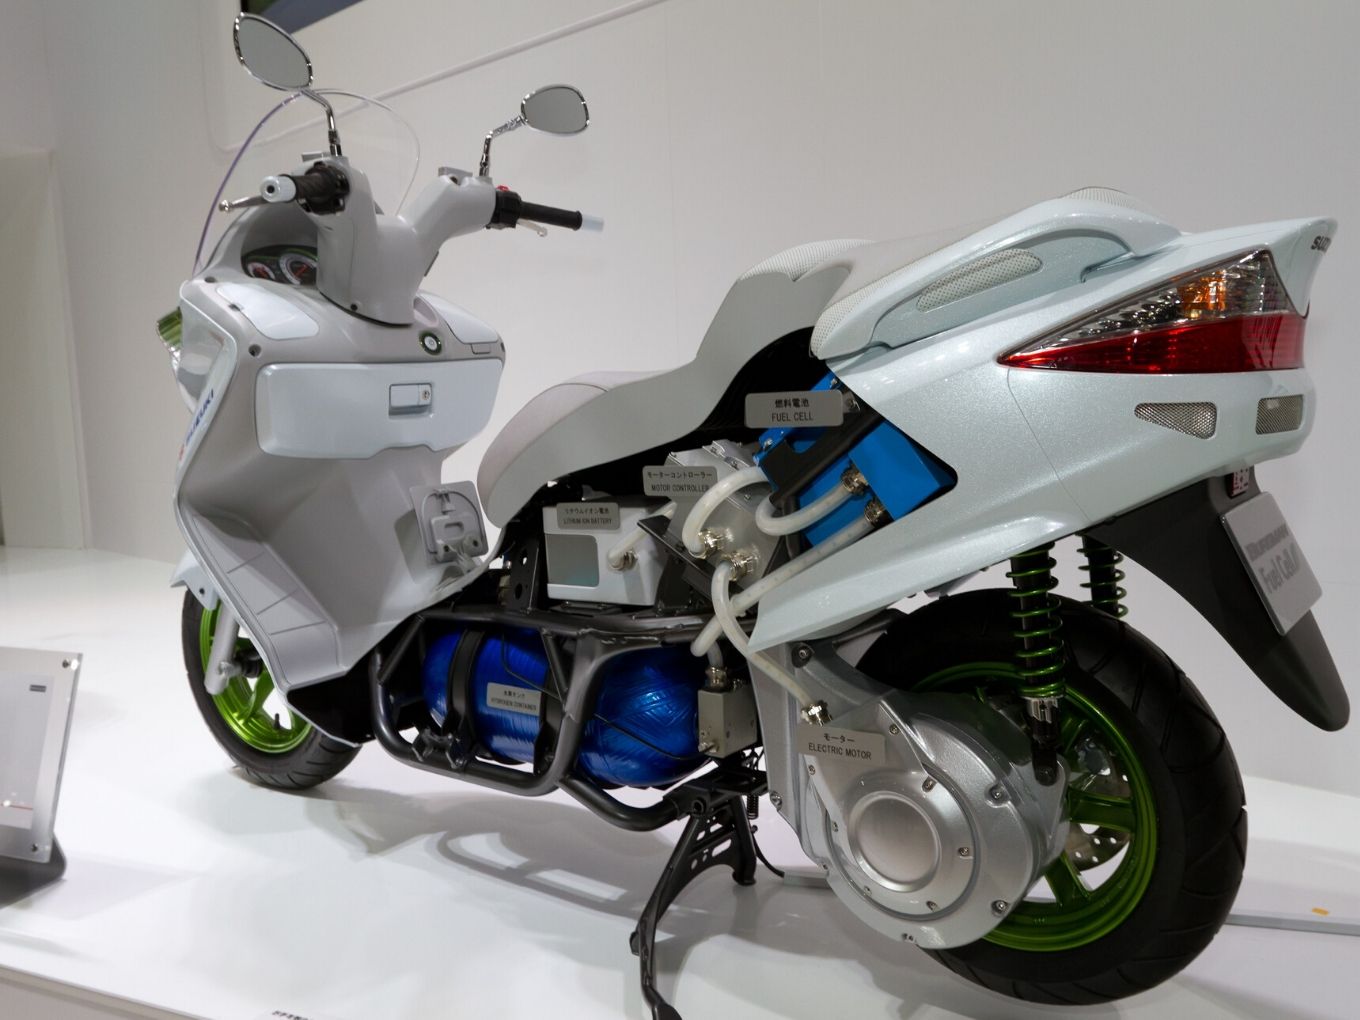 Suzuki Tests India’s EV Waters But Rules Out Immediate Launch. Here’s Why